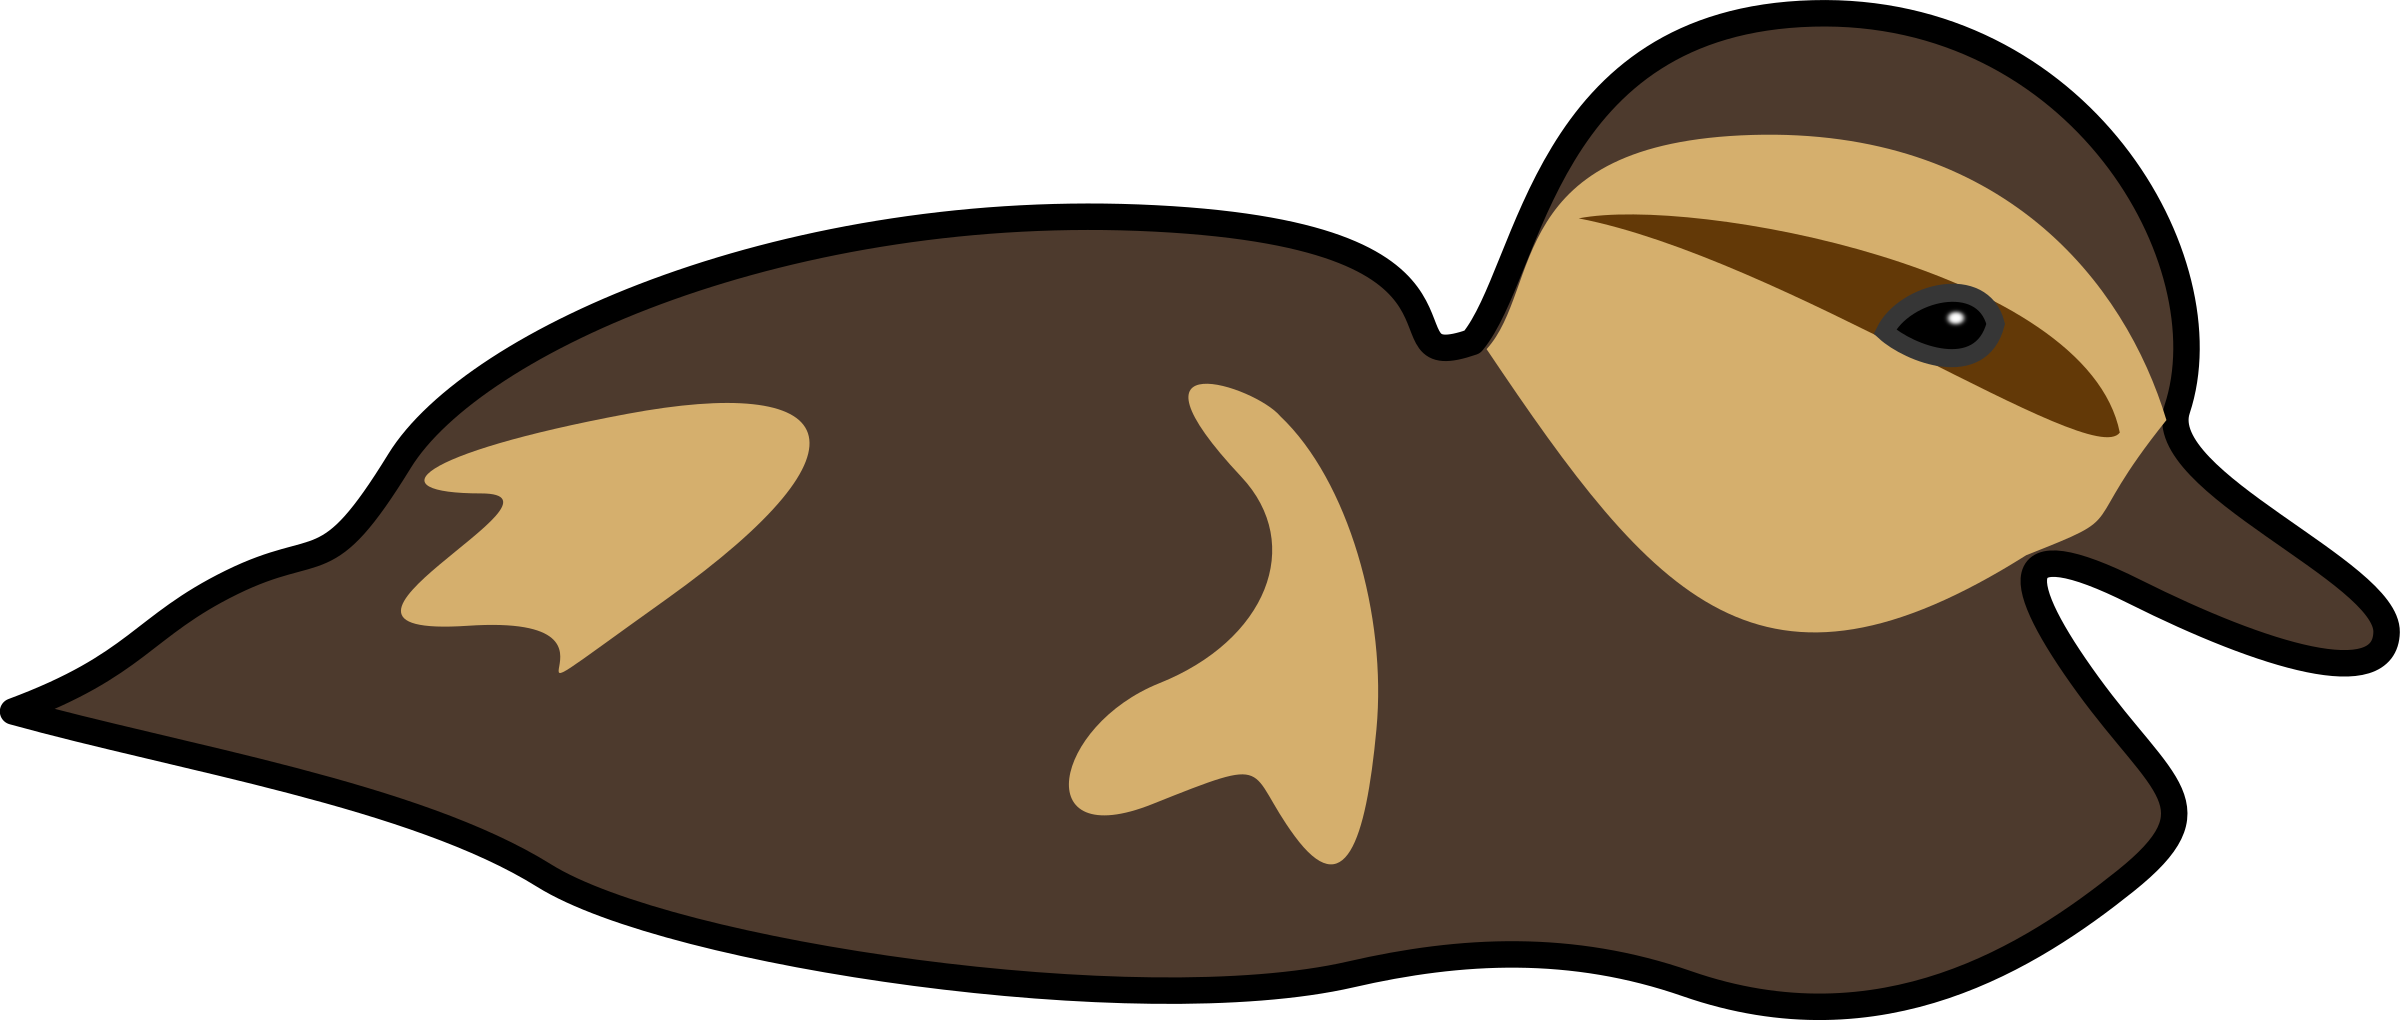 duckling clipart brown